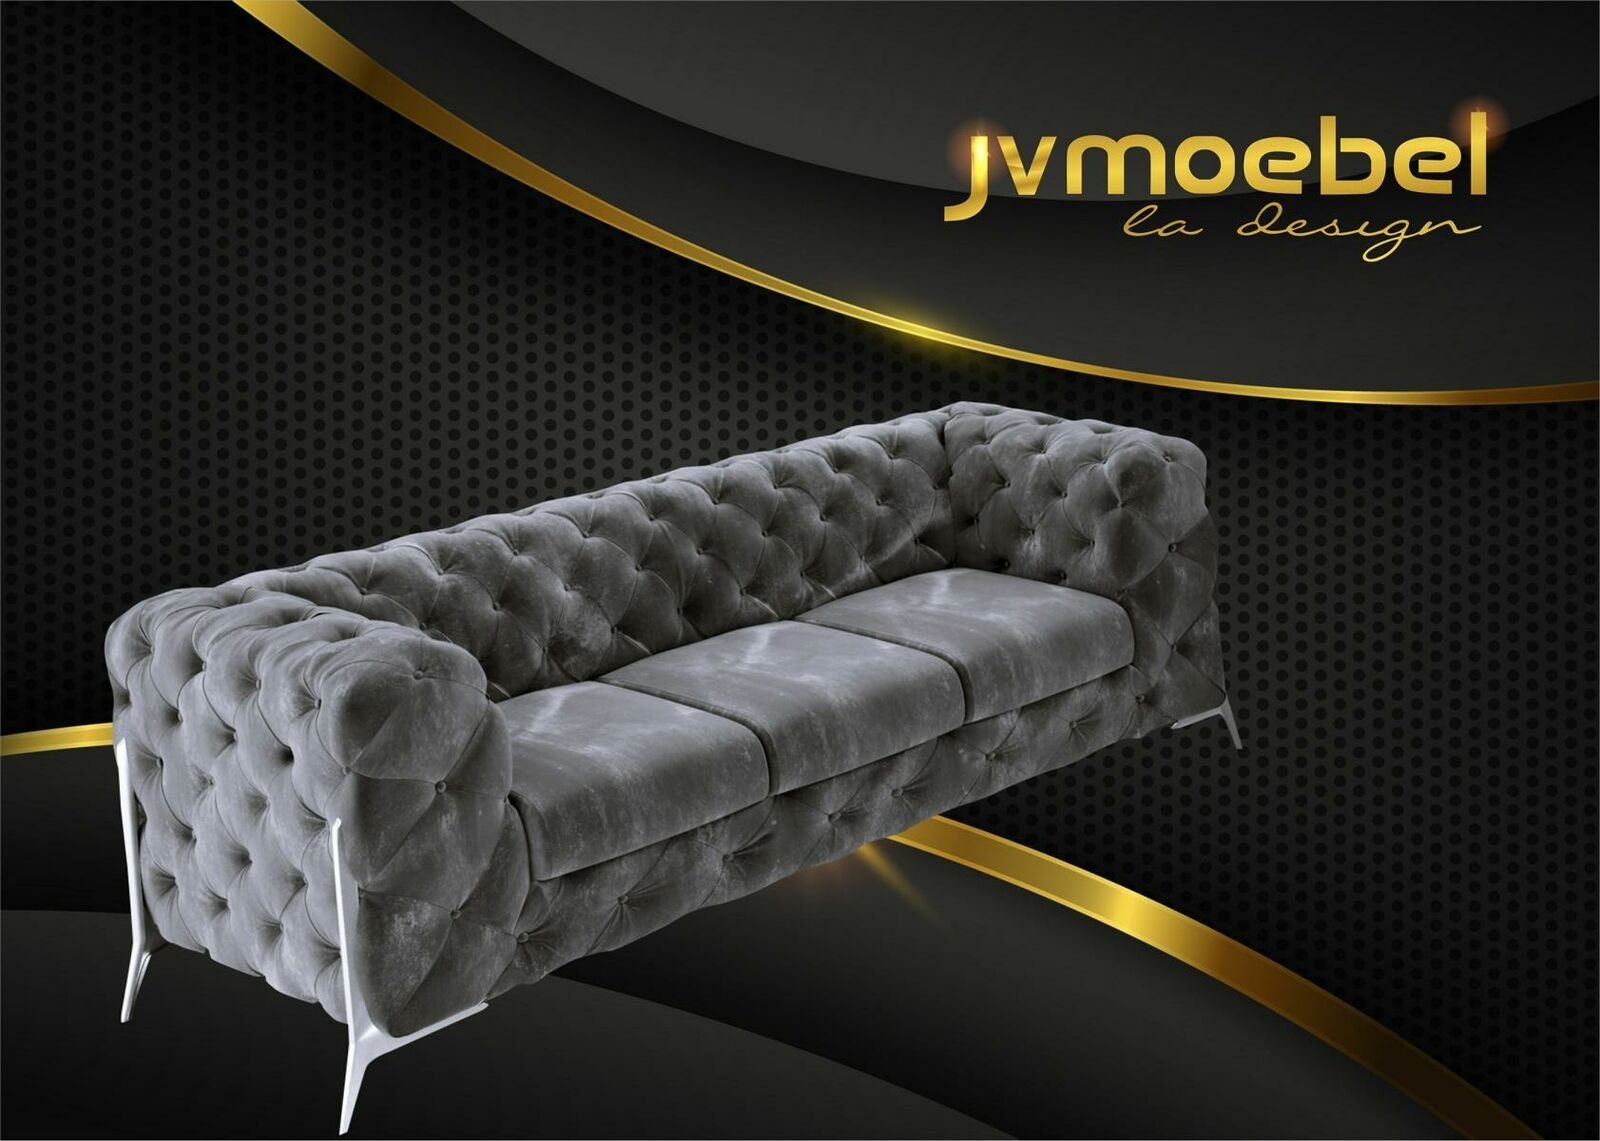 Made Chesterfield Europe in Graues Set Couch 3+2+1 modernes JVmoebel Design Luxus Neu, Chesterfield-Sofa